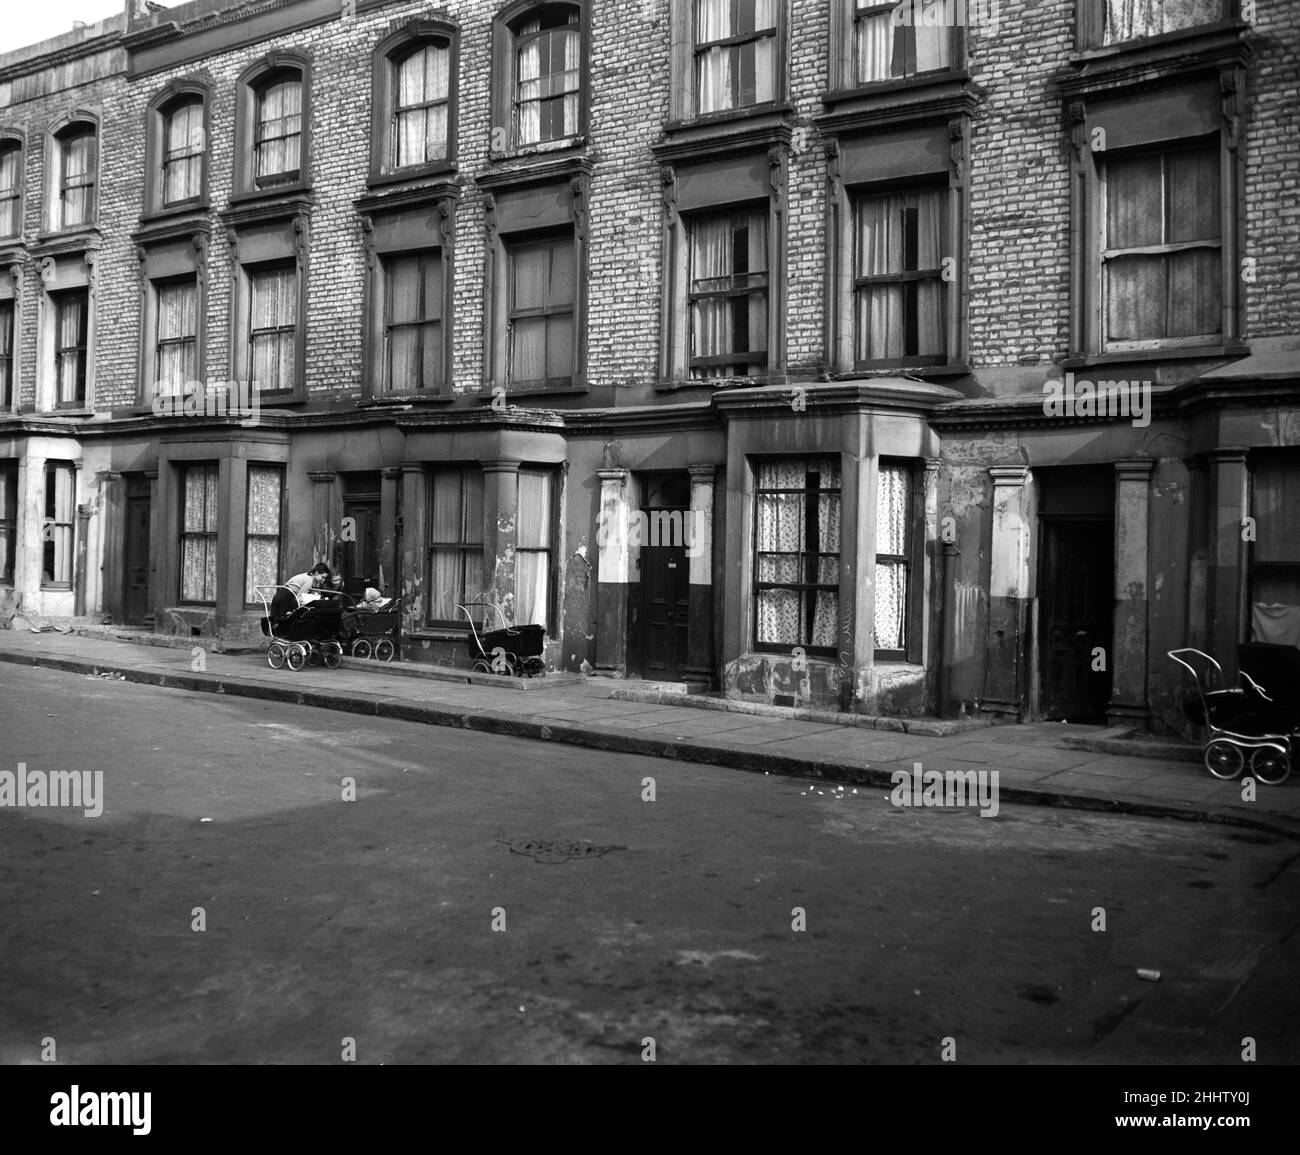 A general view of Rillington Place in west London where at Number 10 the bodies of four women were found. It was in this house that John Christie had lived and moved out of during March 1953, soon afterward the bodies of three of his victims were discovered hidden in an alcove in the kitchen. His wife's body was found beneath the floorboards of the front room. 25th March 1953. Stock Photo